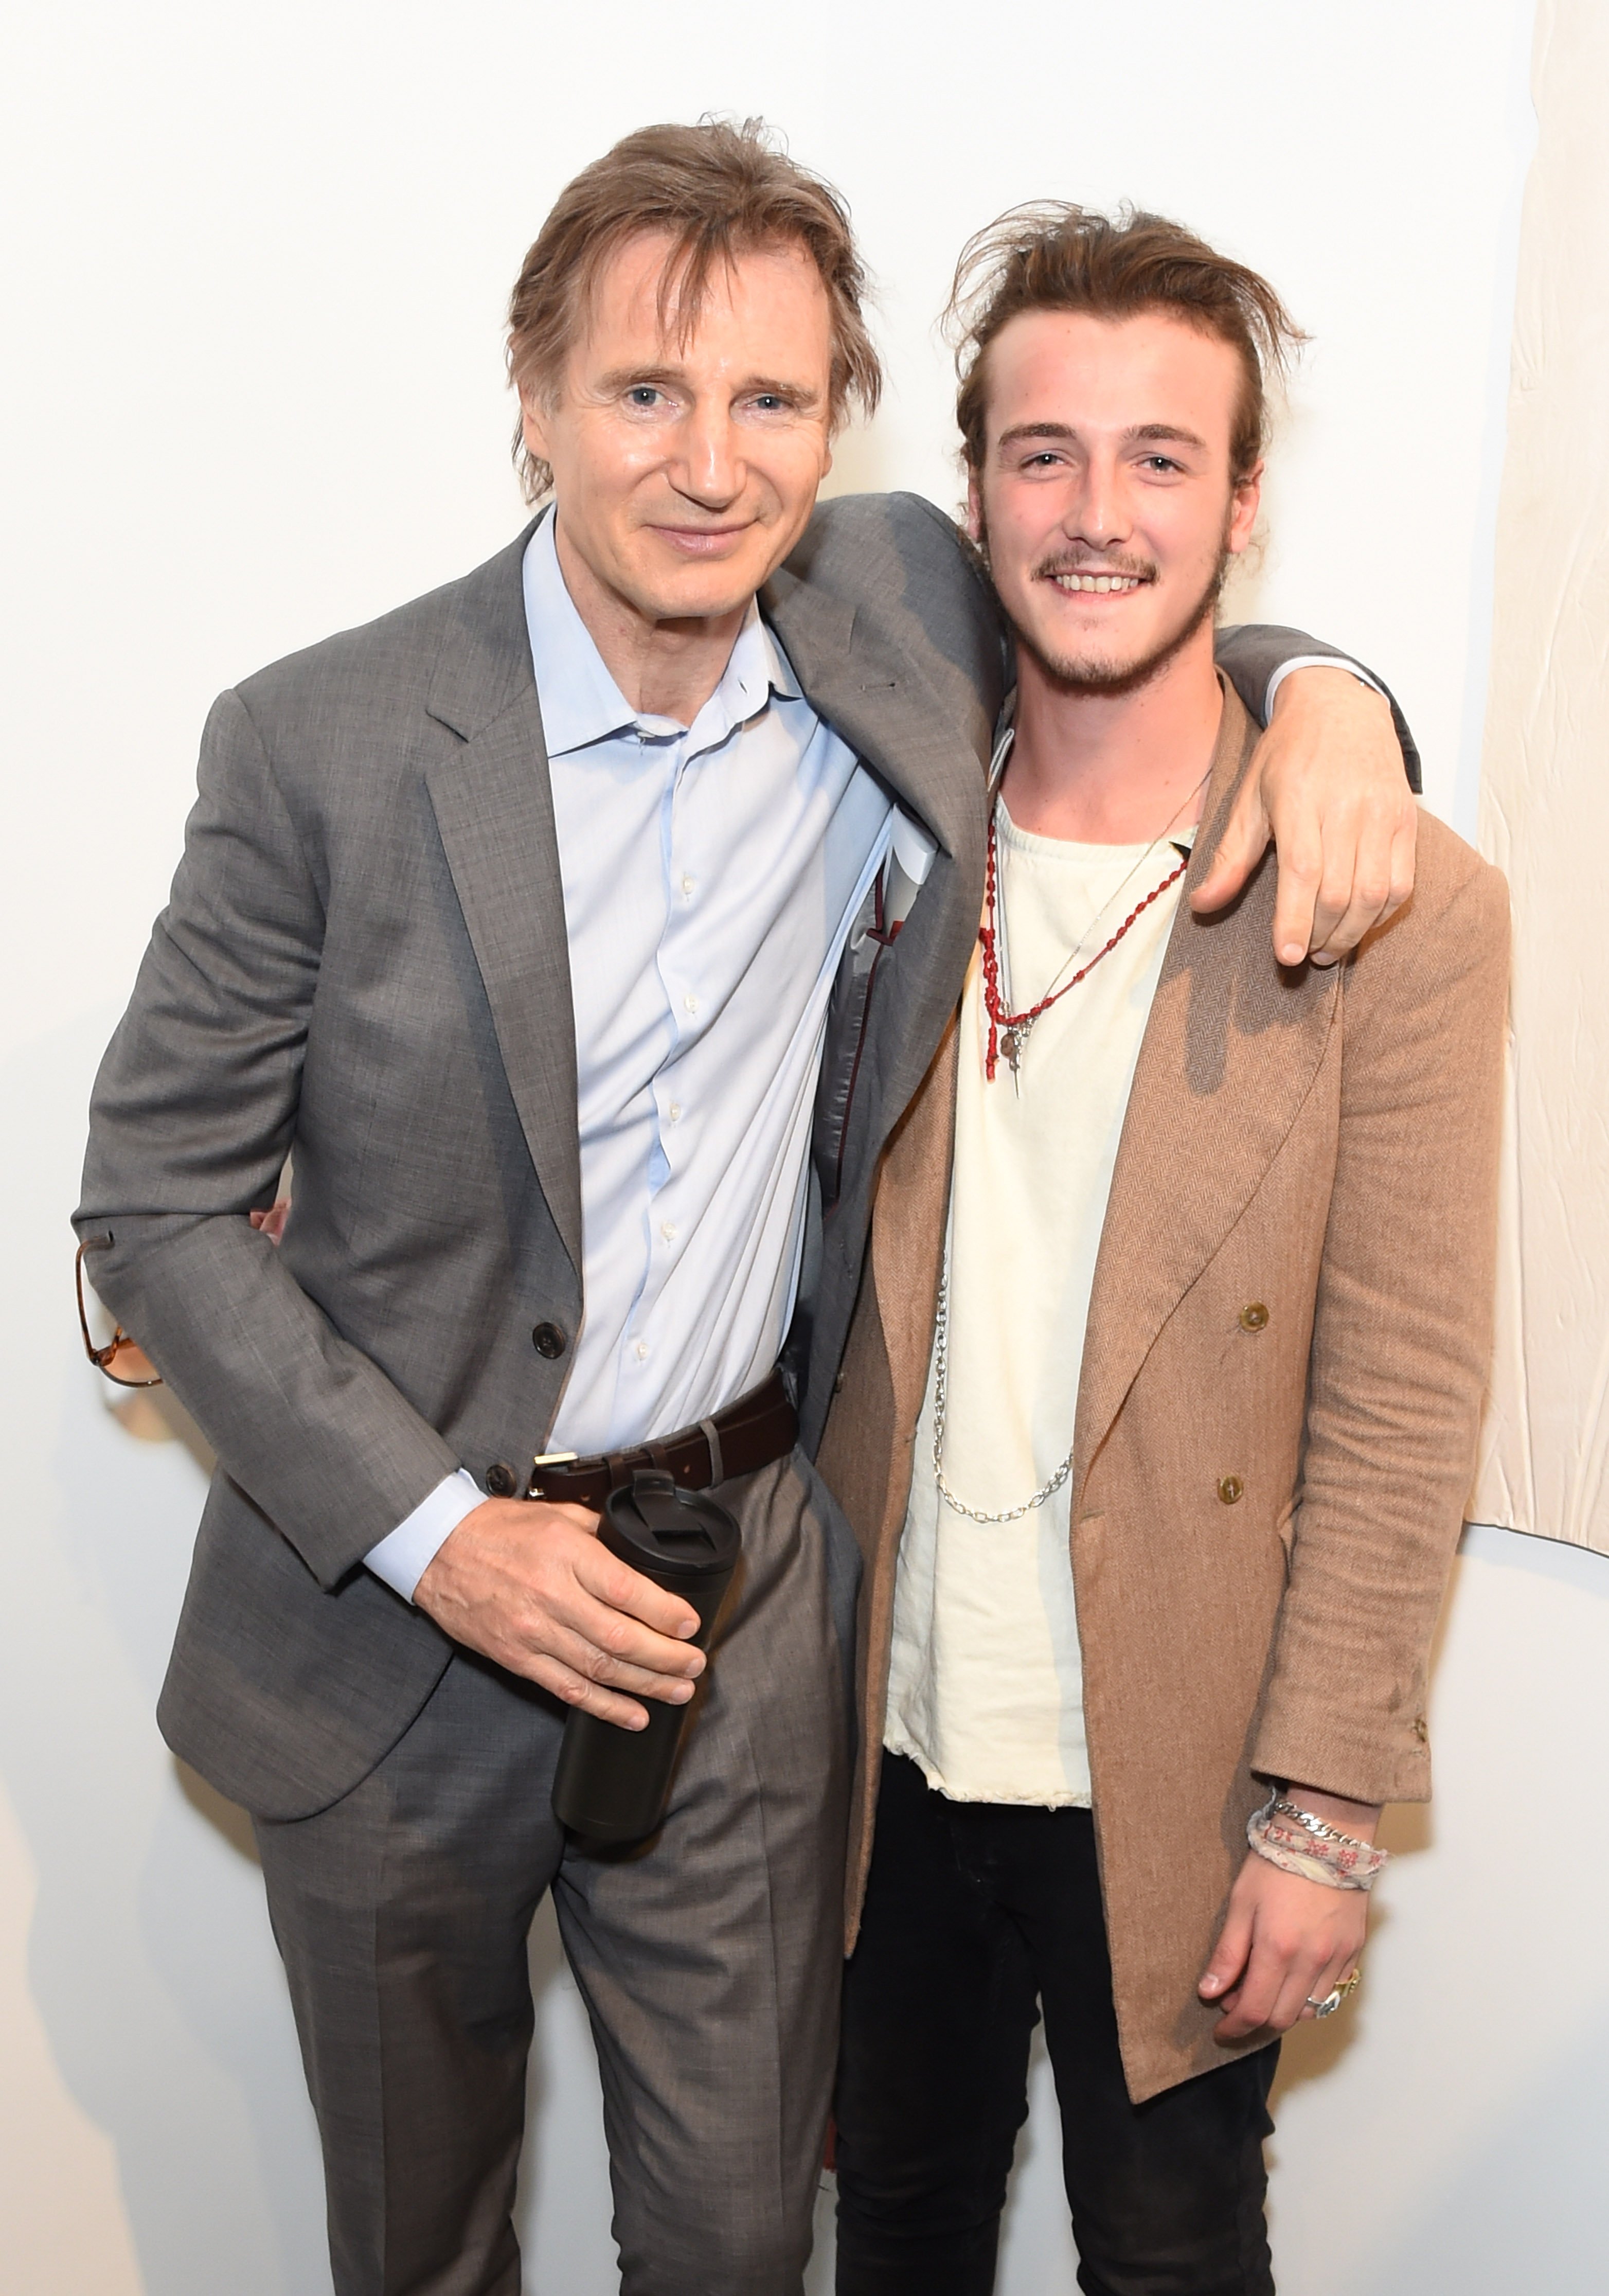 Liam Neeson (L ) and Michael Neeson at the Maison Mais Non launch party as Micheal Neeson launches fashion gallery in Soho on June 2, 2015. | Source: Getty Images